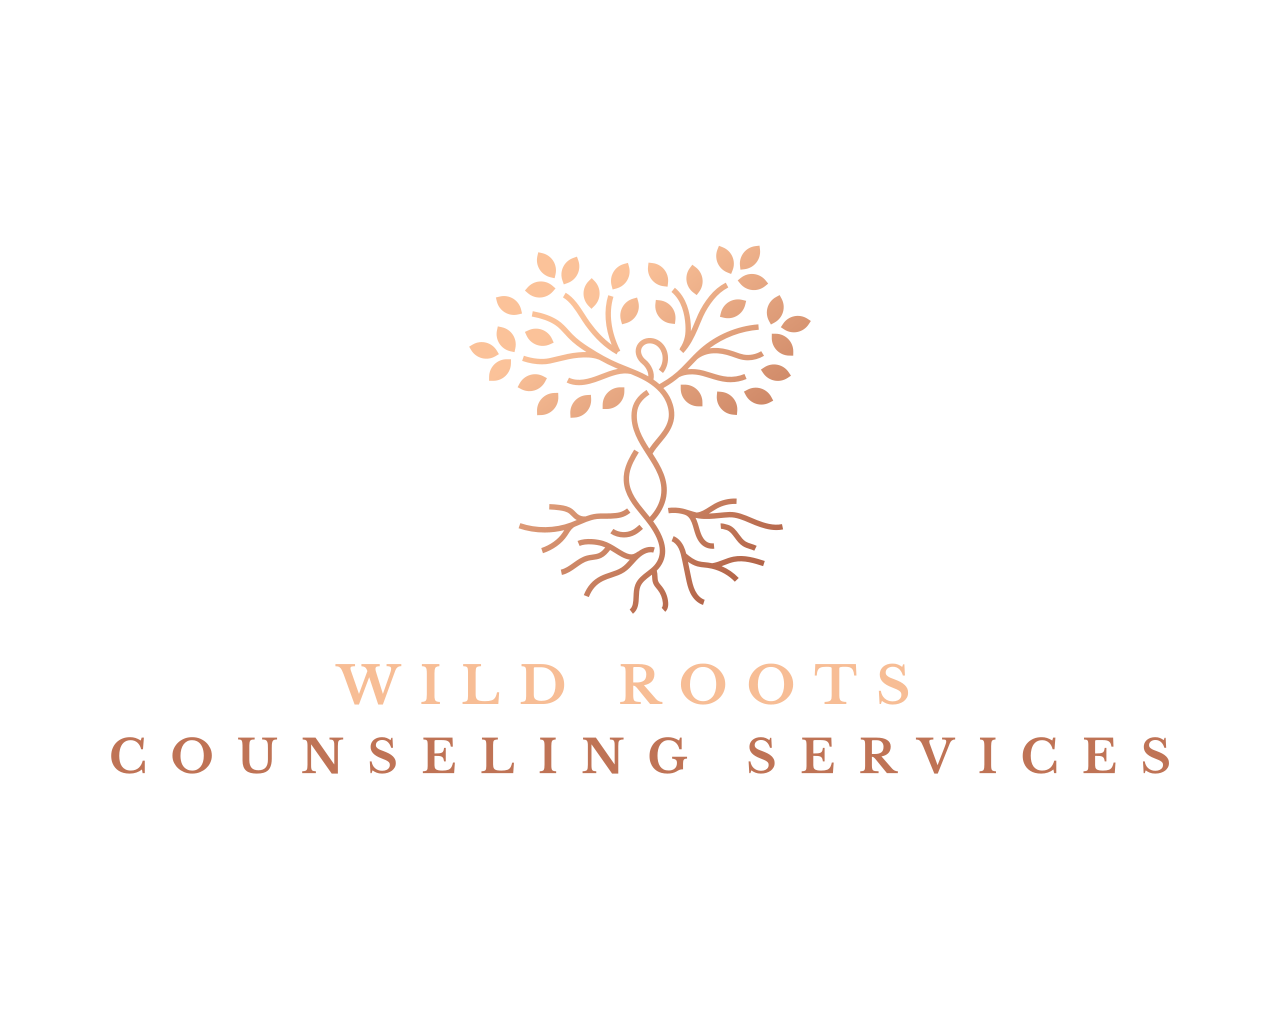 Wild Roots Counseling Services